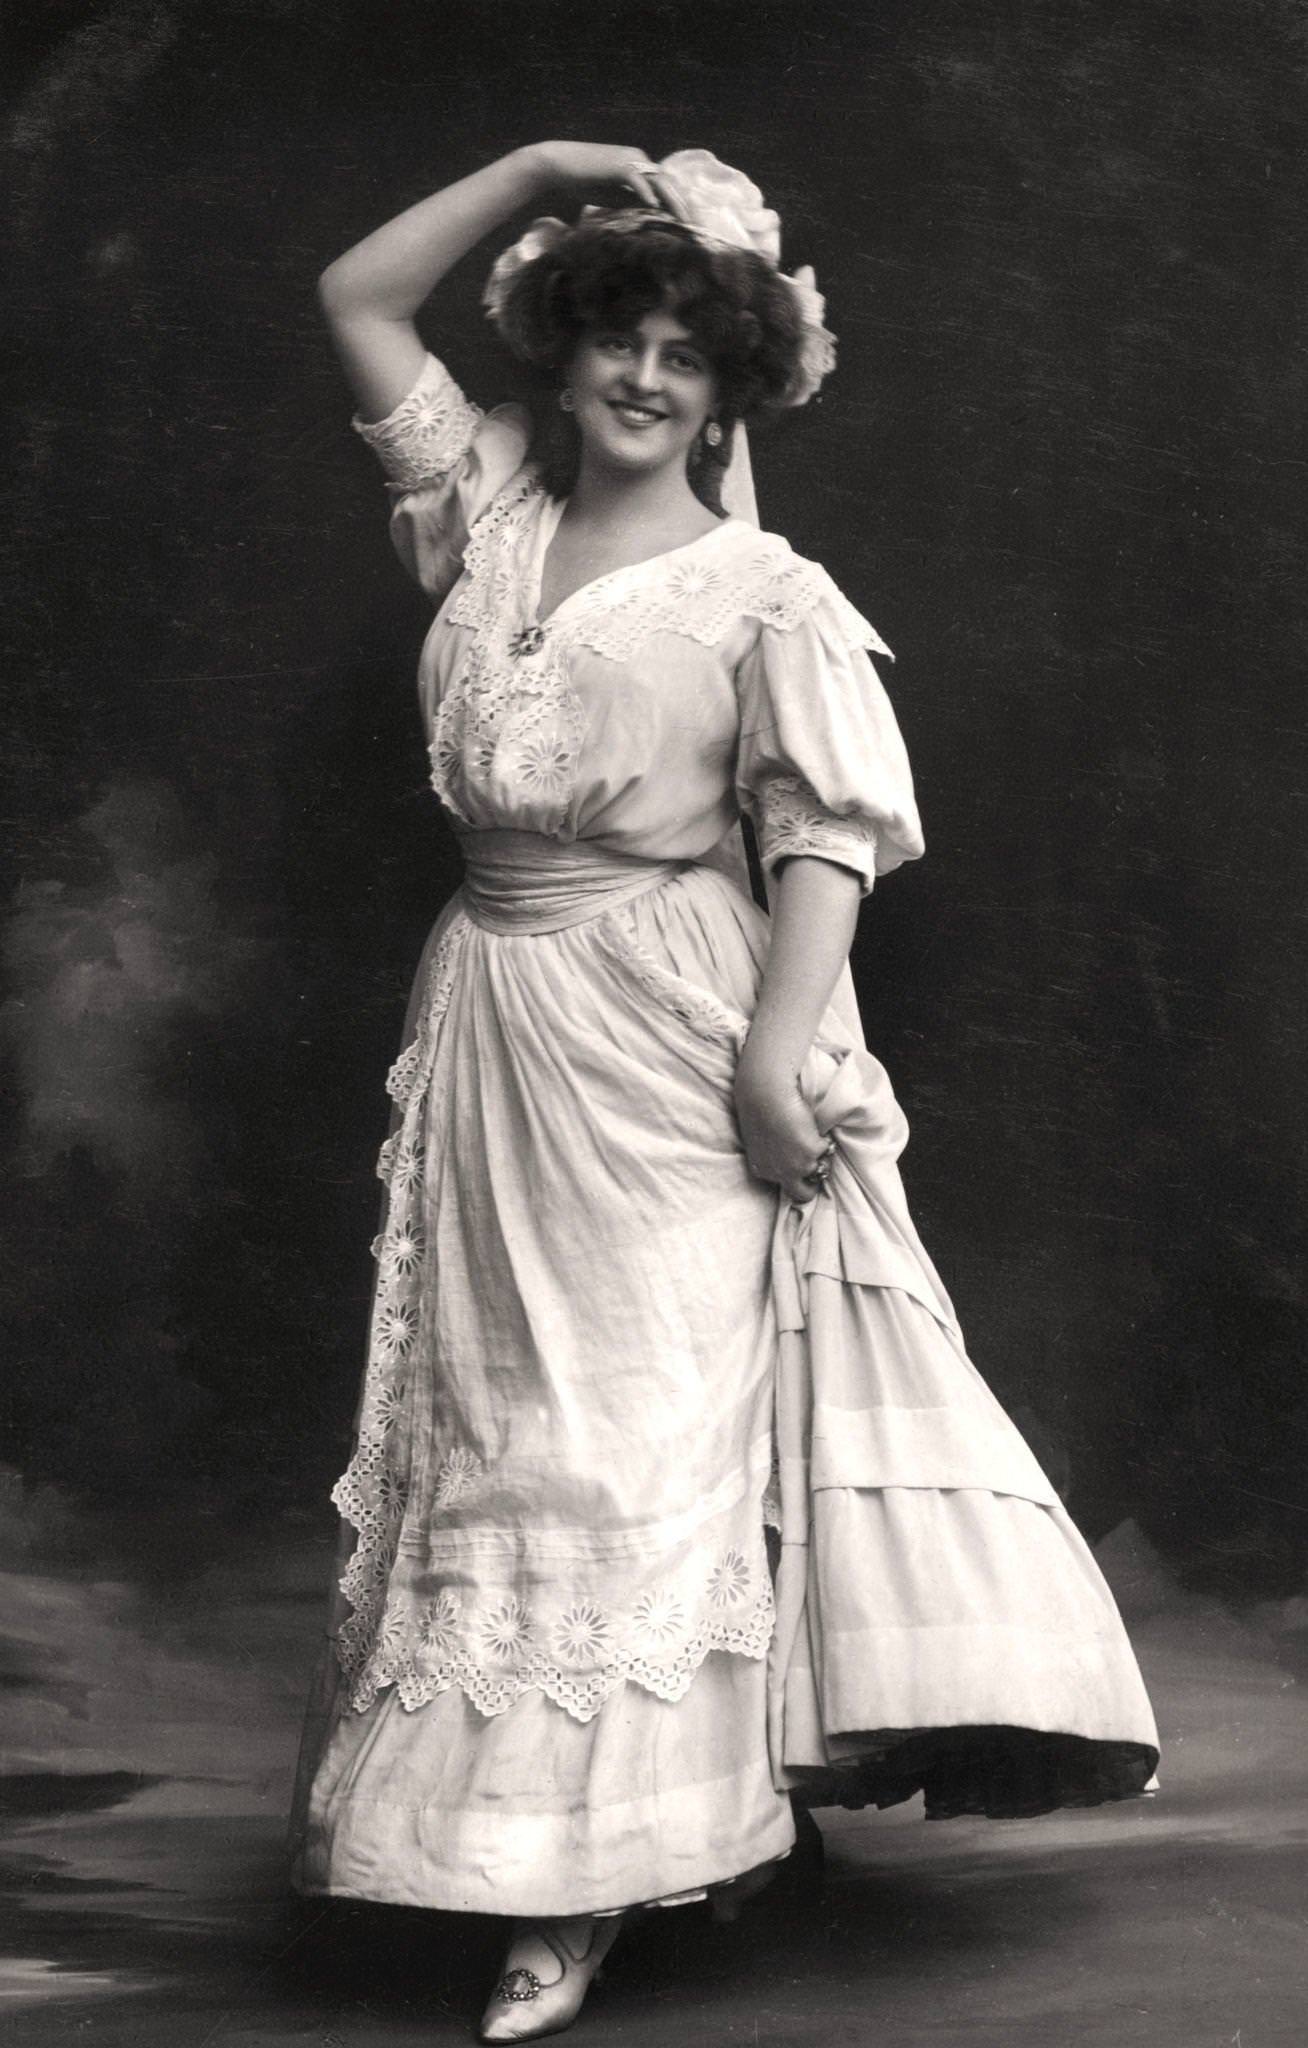 Evie poses for a portrait in 1905